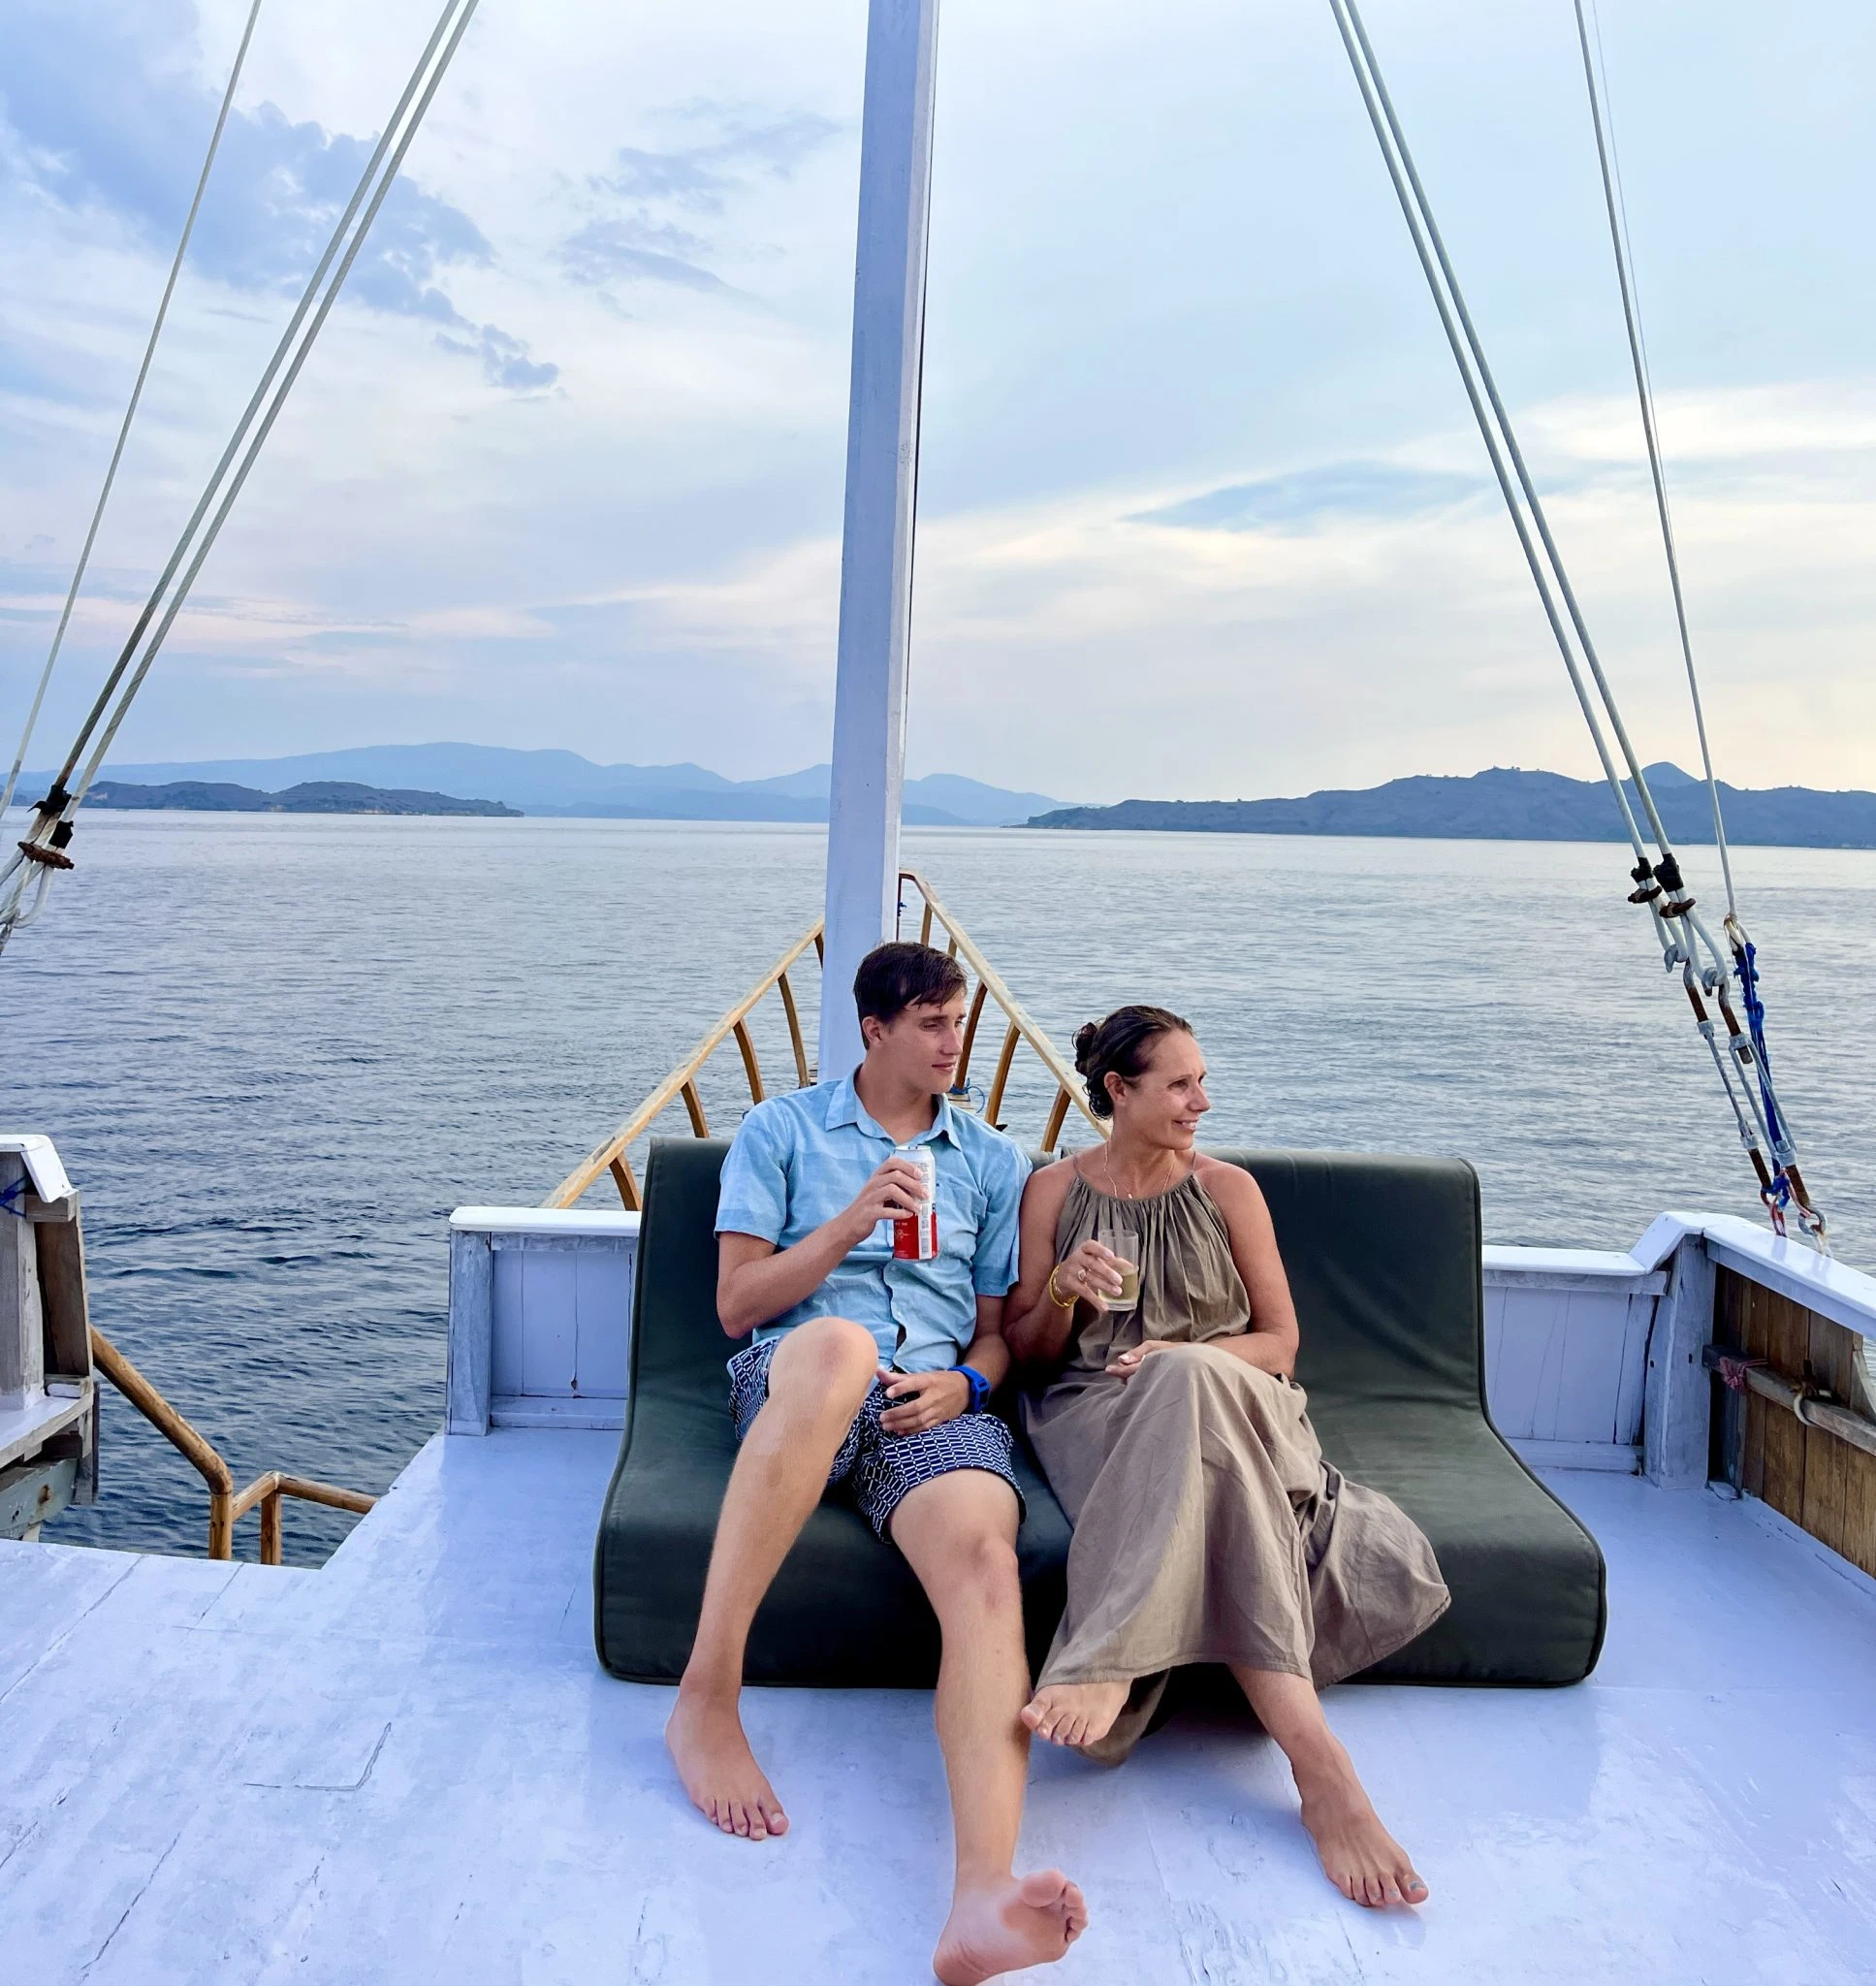 Splurge for a private boat for sailing around the Komodo Islands if it's within your budget